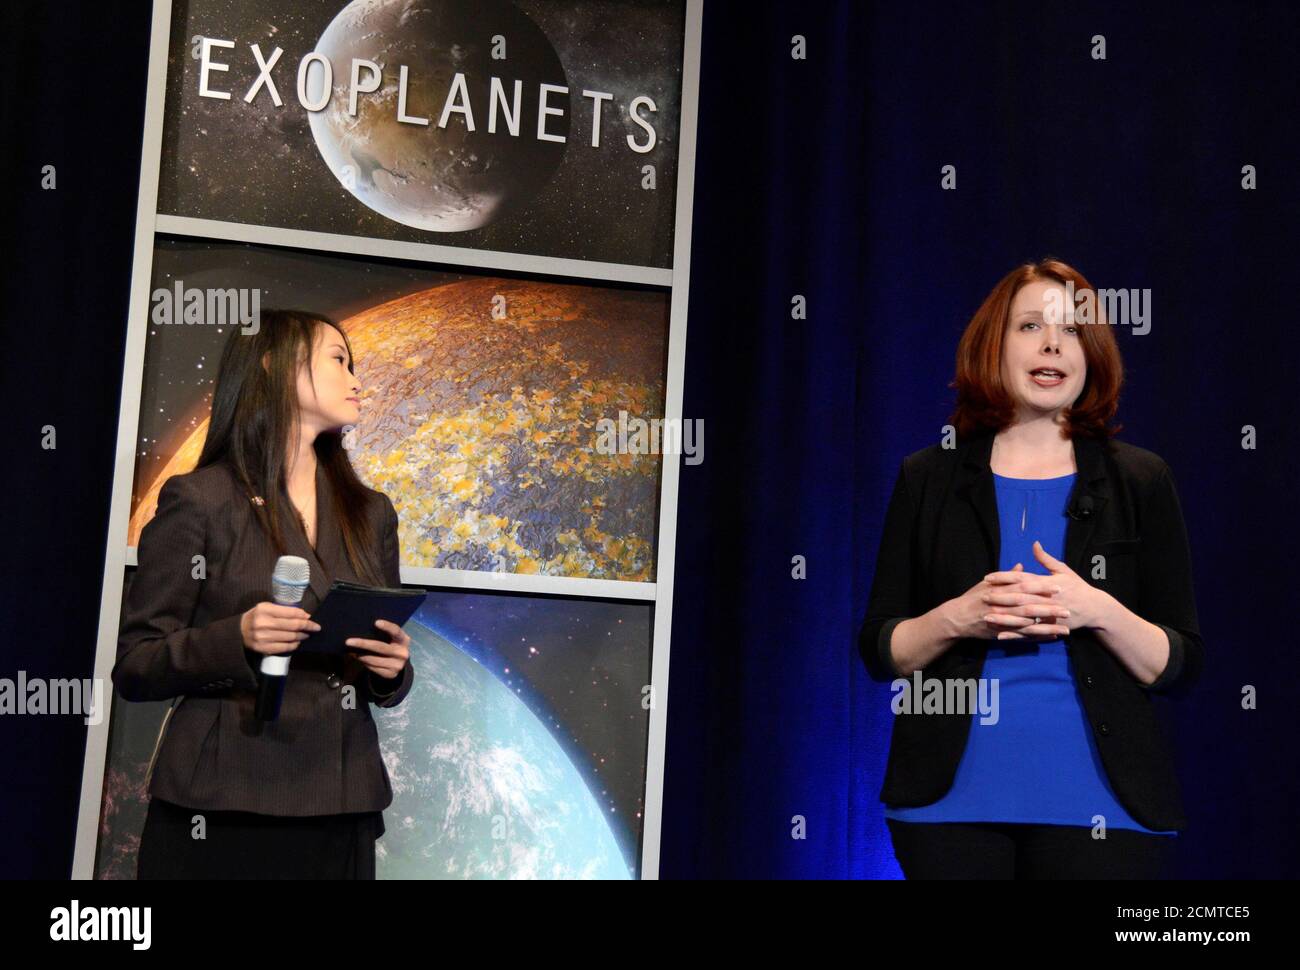 Space Telescope Science Institute astronomer Nikole Lewis (R) makes remarks as NASA Public Affairs Officer Felicia Chou listens, during a news conference to present new findings on exoplanets, planets that orbit stars other than Earth's sun, in Washington, U.S., February 22, 2017.                             REUTERS/Mike Theiler Stock Photo